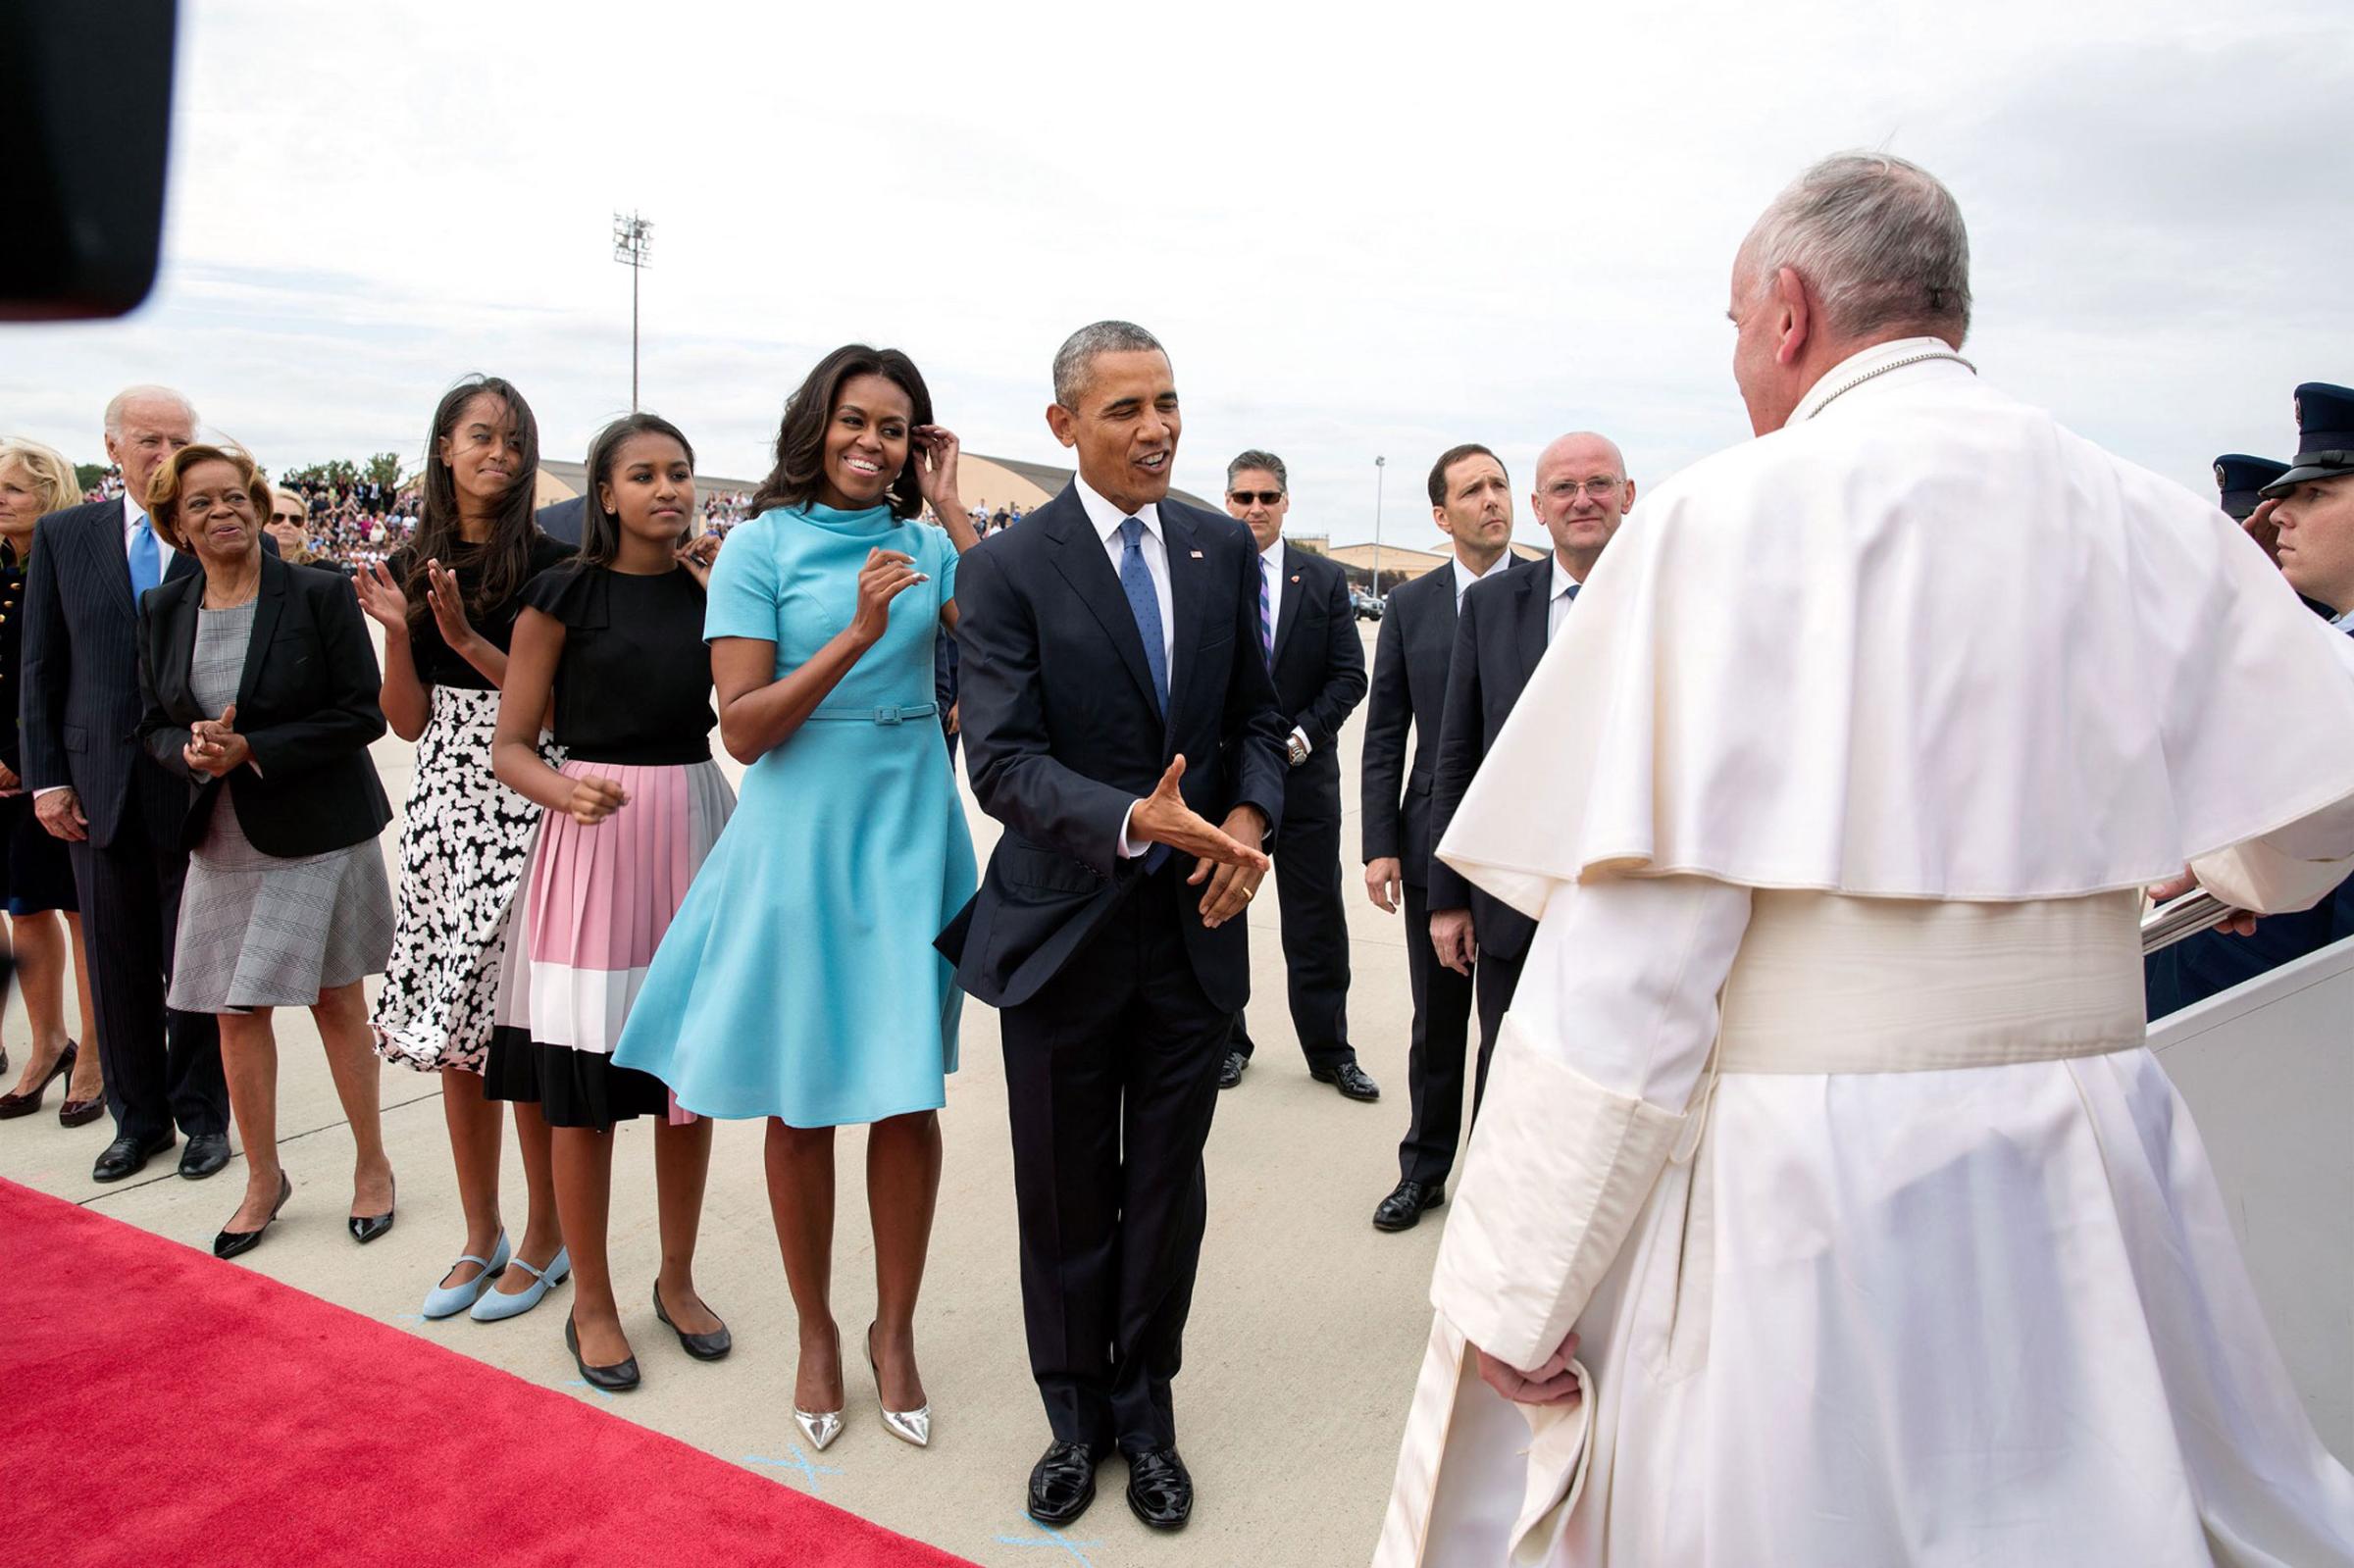 "The Obama family and Biden family greet Pope Francis as he arrives in the United States for the first time at Joint Base Andrews," Sept. 22, 2015.